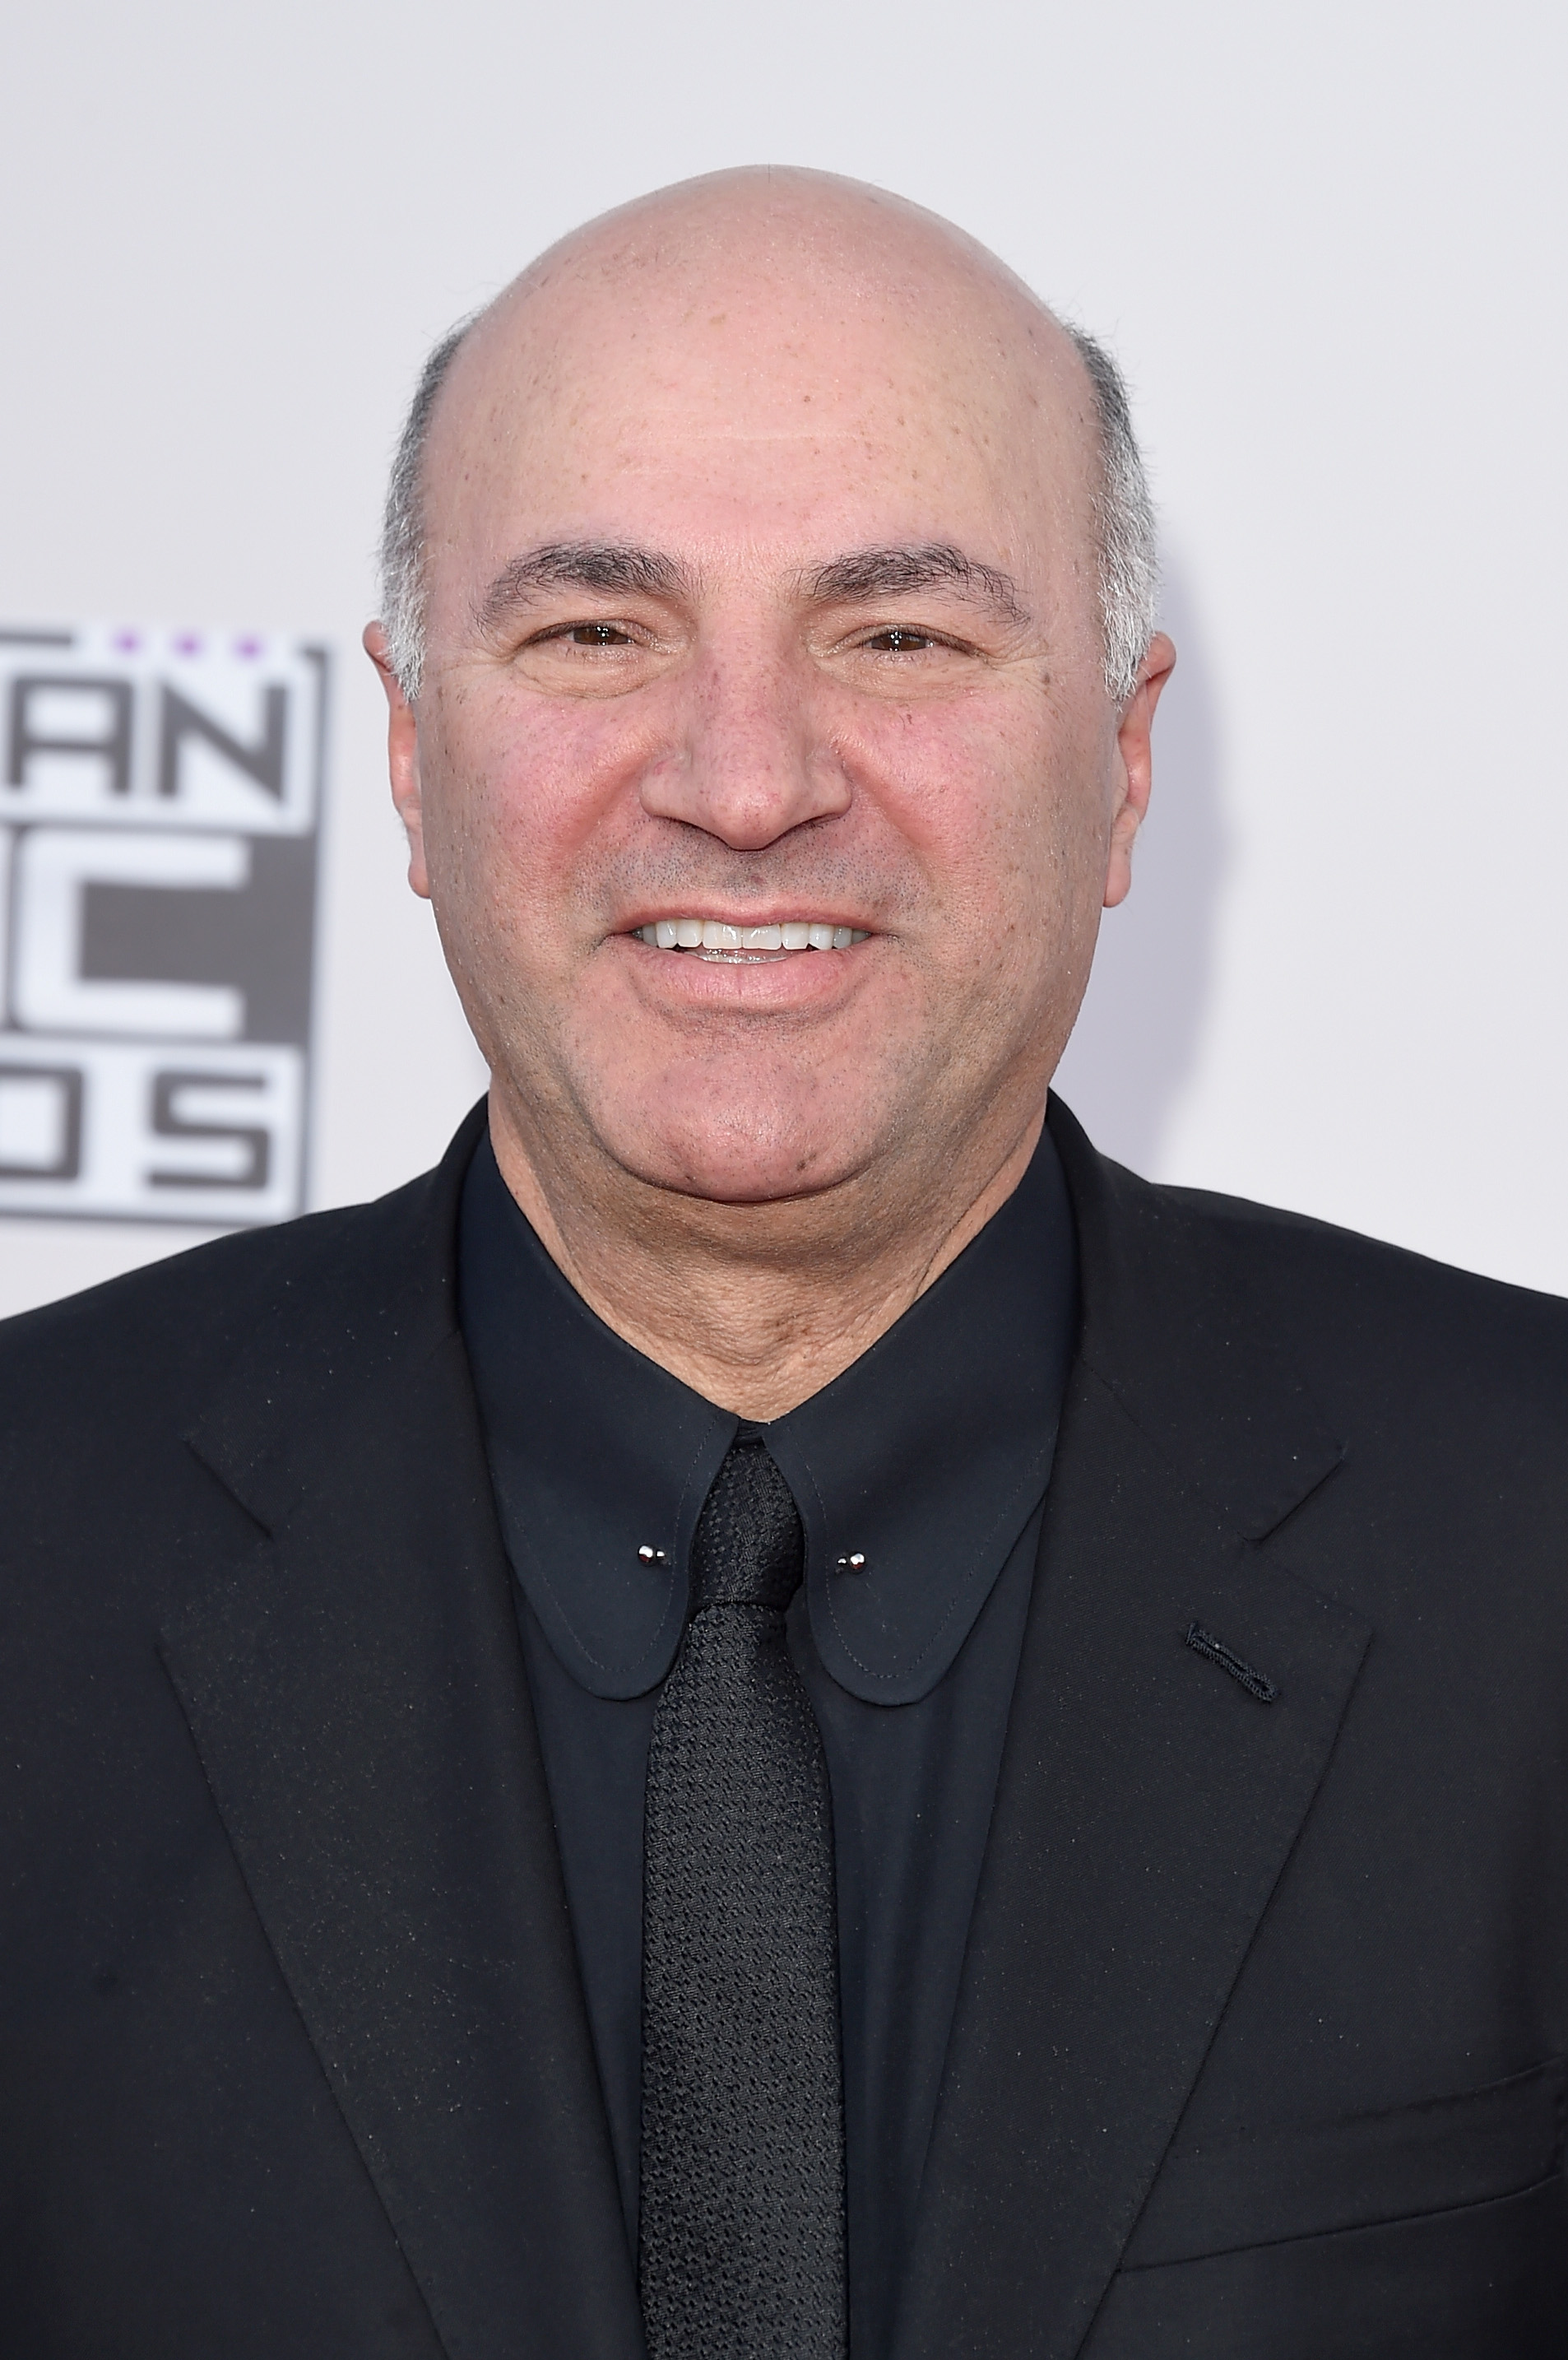 Kevin O'Leary Net Worth 5 Fast Facts You Need to Know